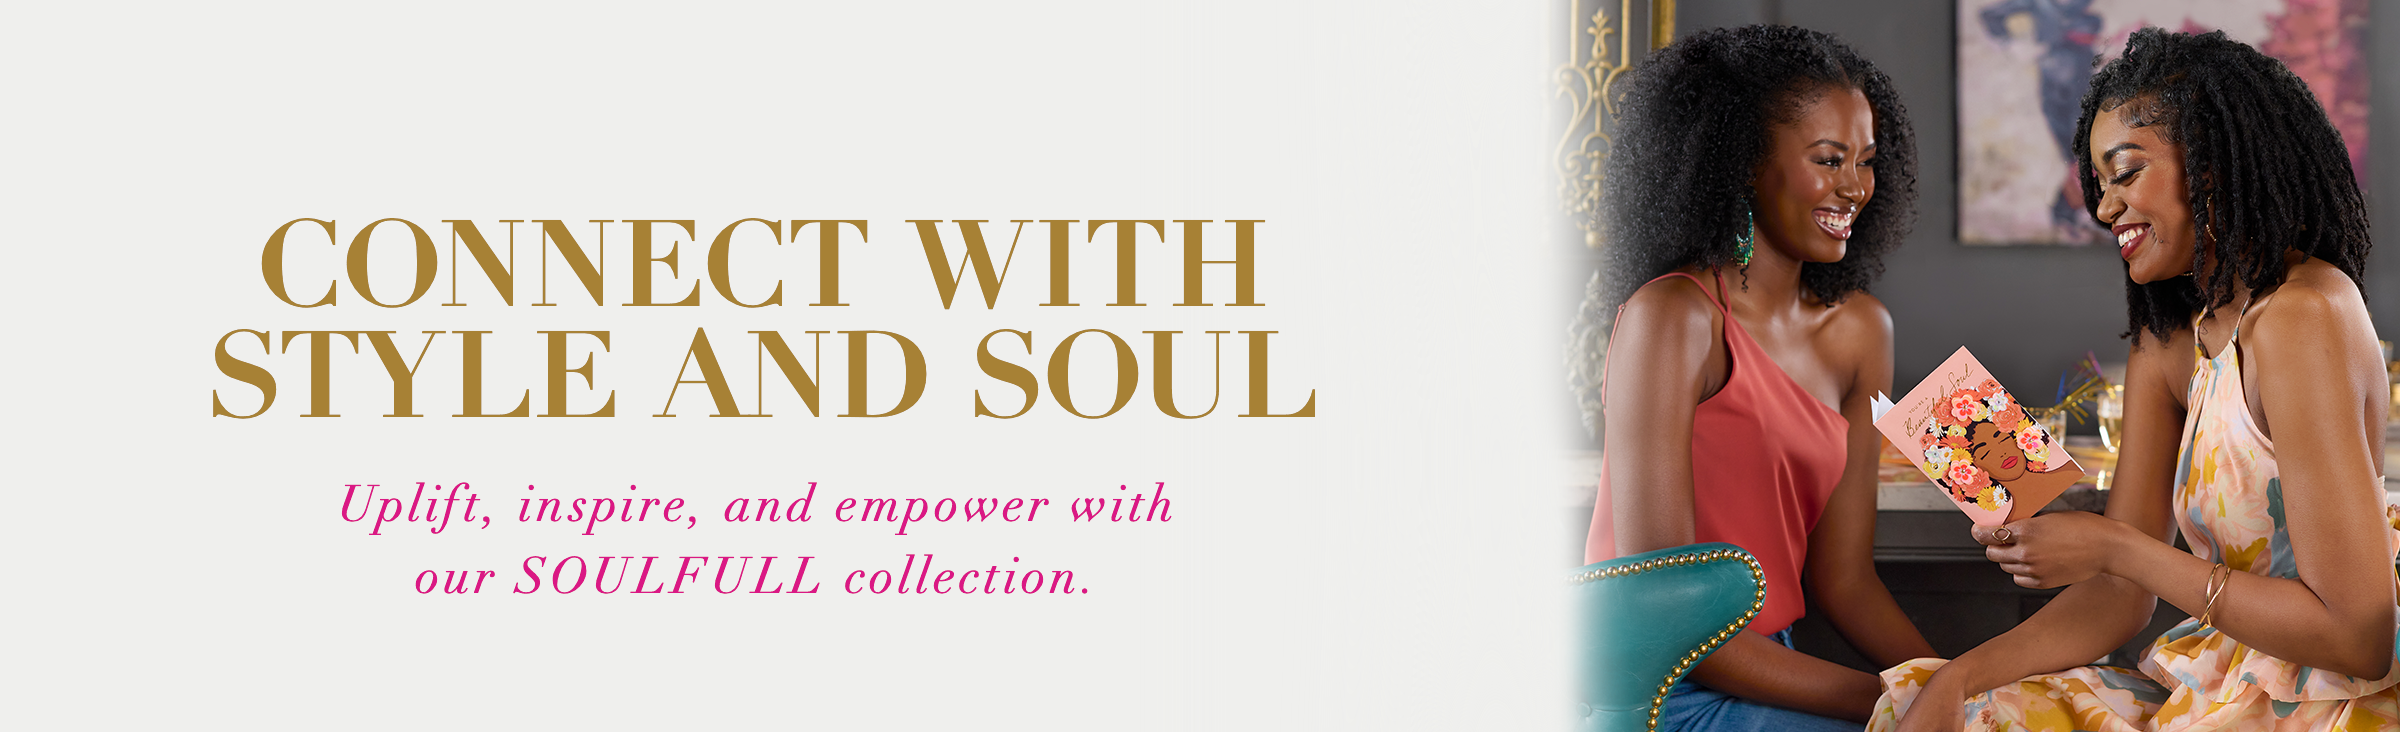 Connect with Style and Soul Uplift, inspire and empower with our SOULFULL collection